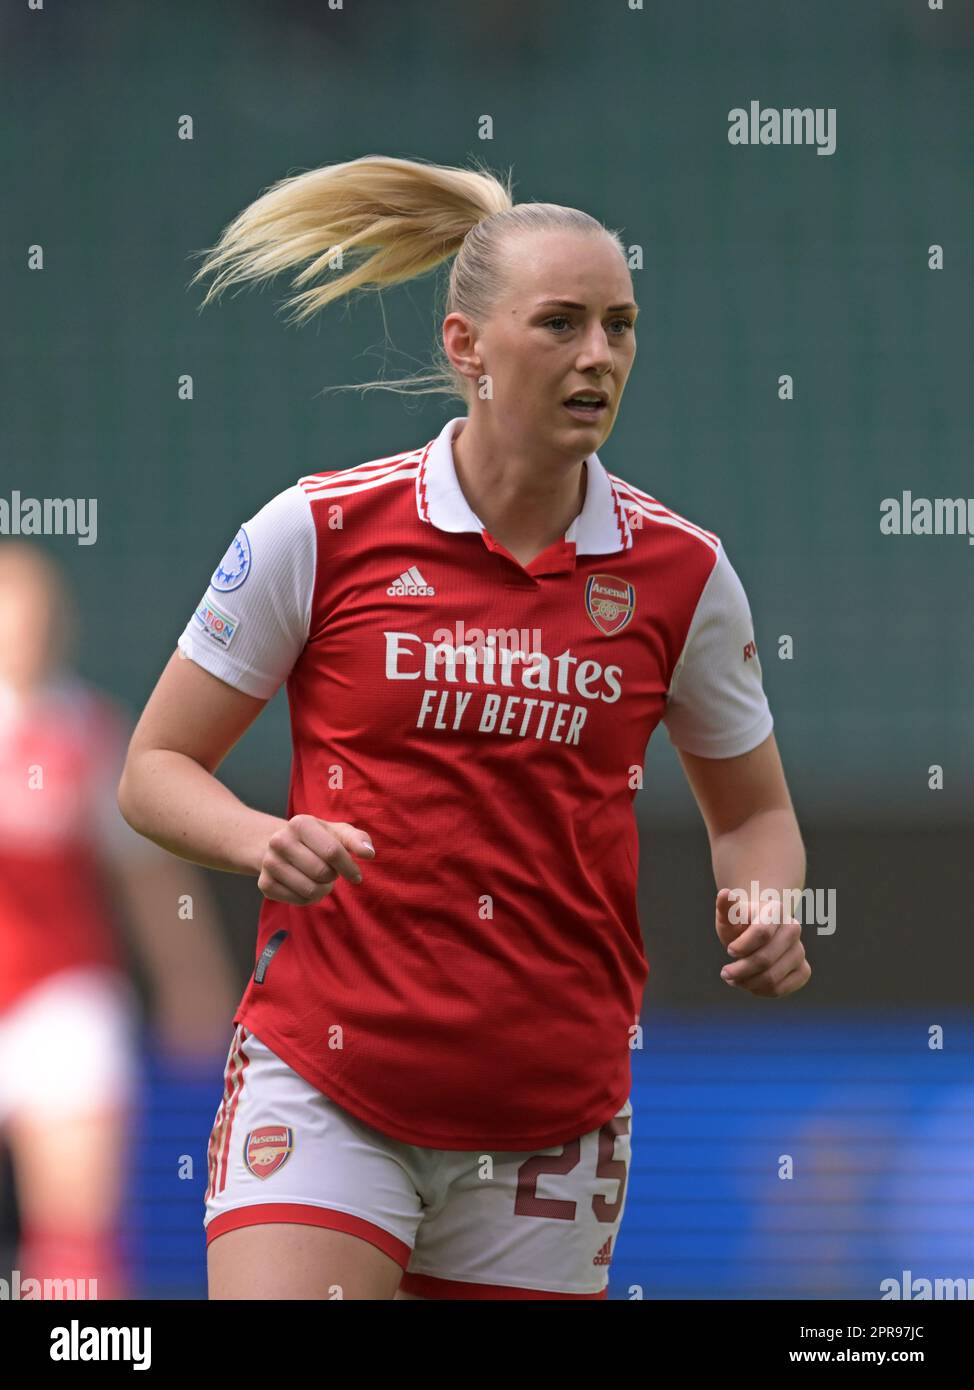 WOLFSBURG - Stina Blackstenius of Arsenal WFC during the UEFA Champions League Women's Semifinal match between VFL Wolfsburg and Arsenal WFC at VFL Wolfsburg Arena on April 23, 2023 in Wolfsburg, Germany. AP | Dutch Height | GERRIT OF COLOGNE Stock Photo